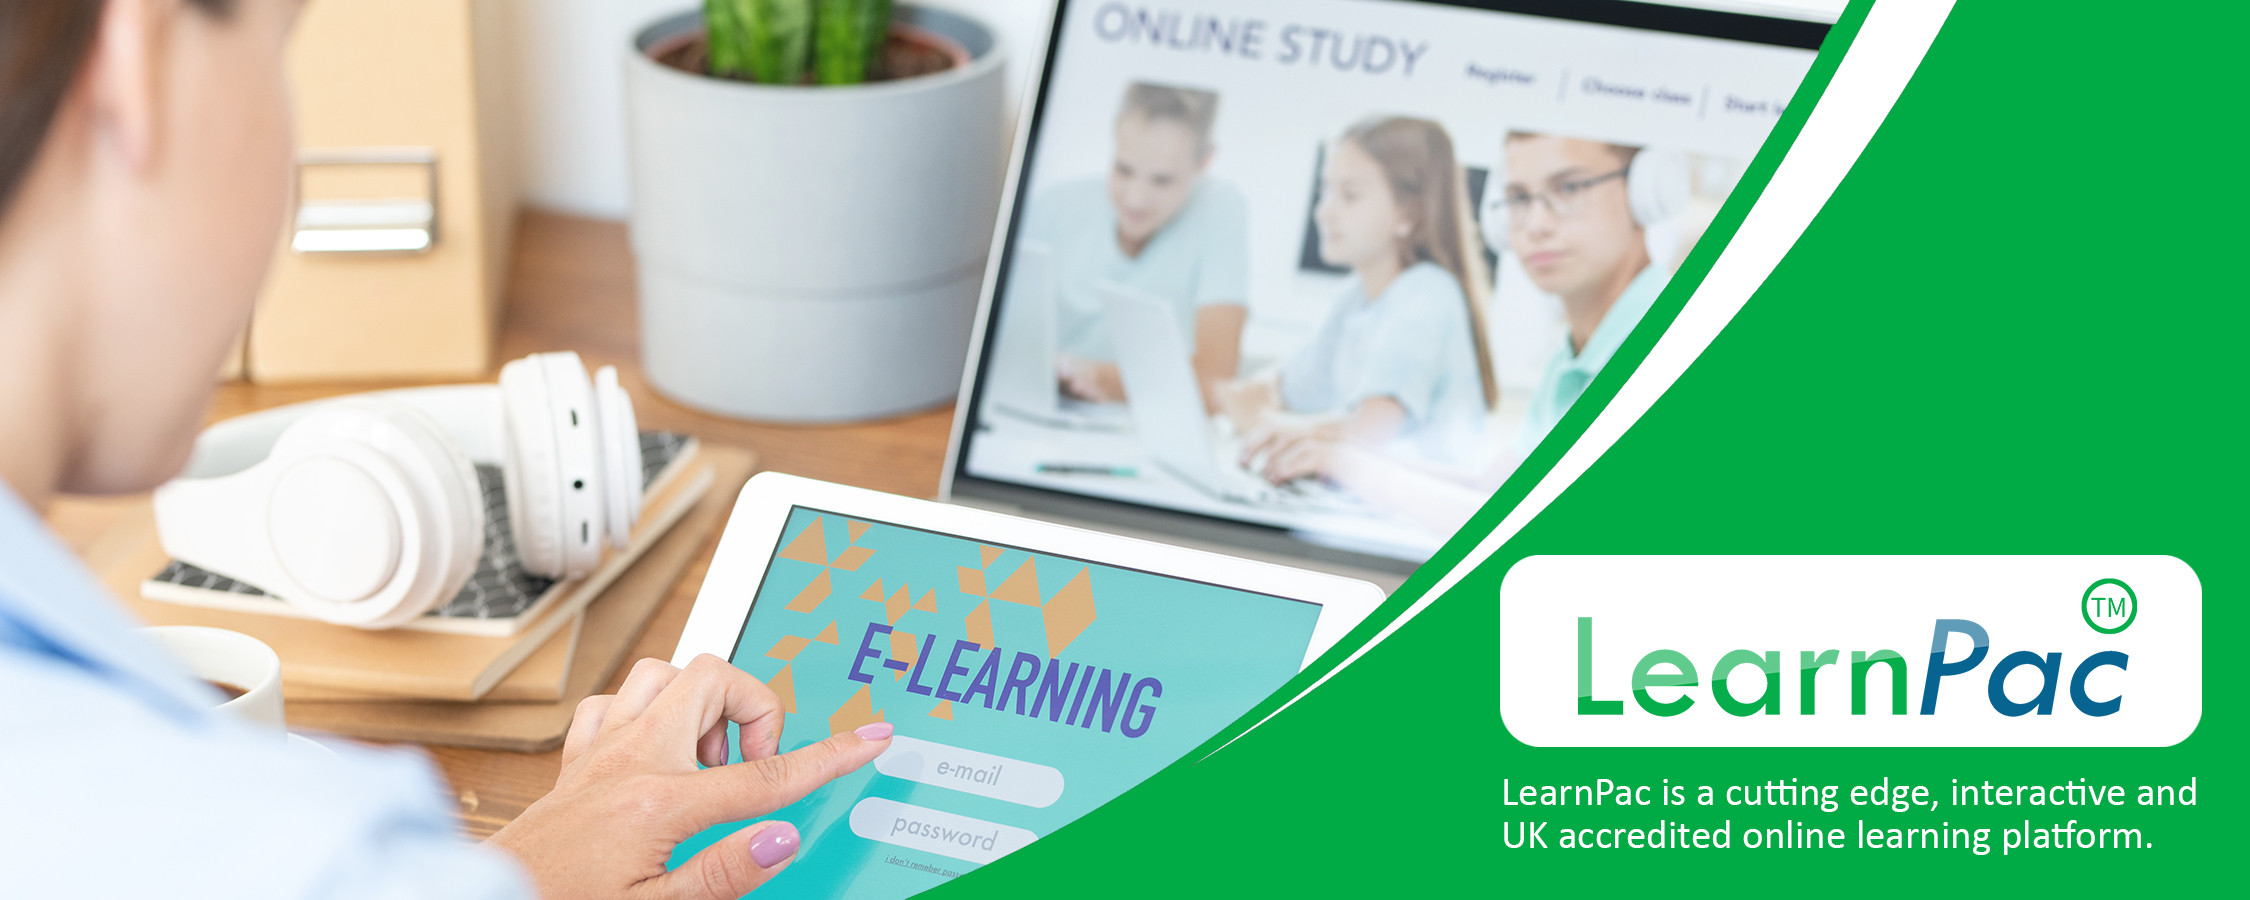 Social Media in the Workplace - Online Learning Courses - E-Learning Courses - LearnPac Systems UK -